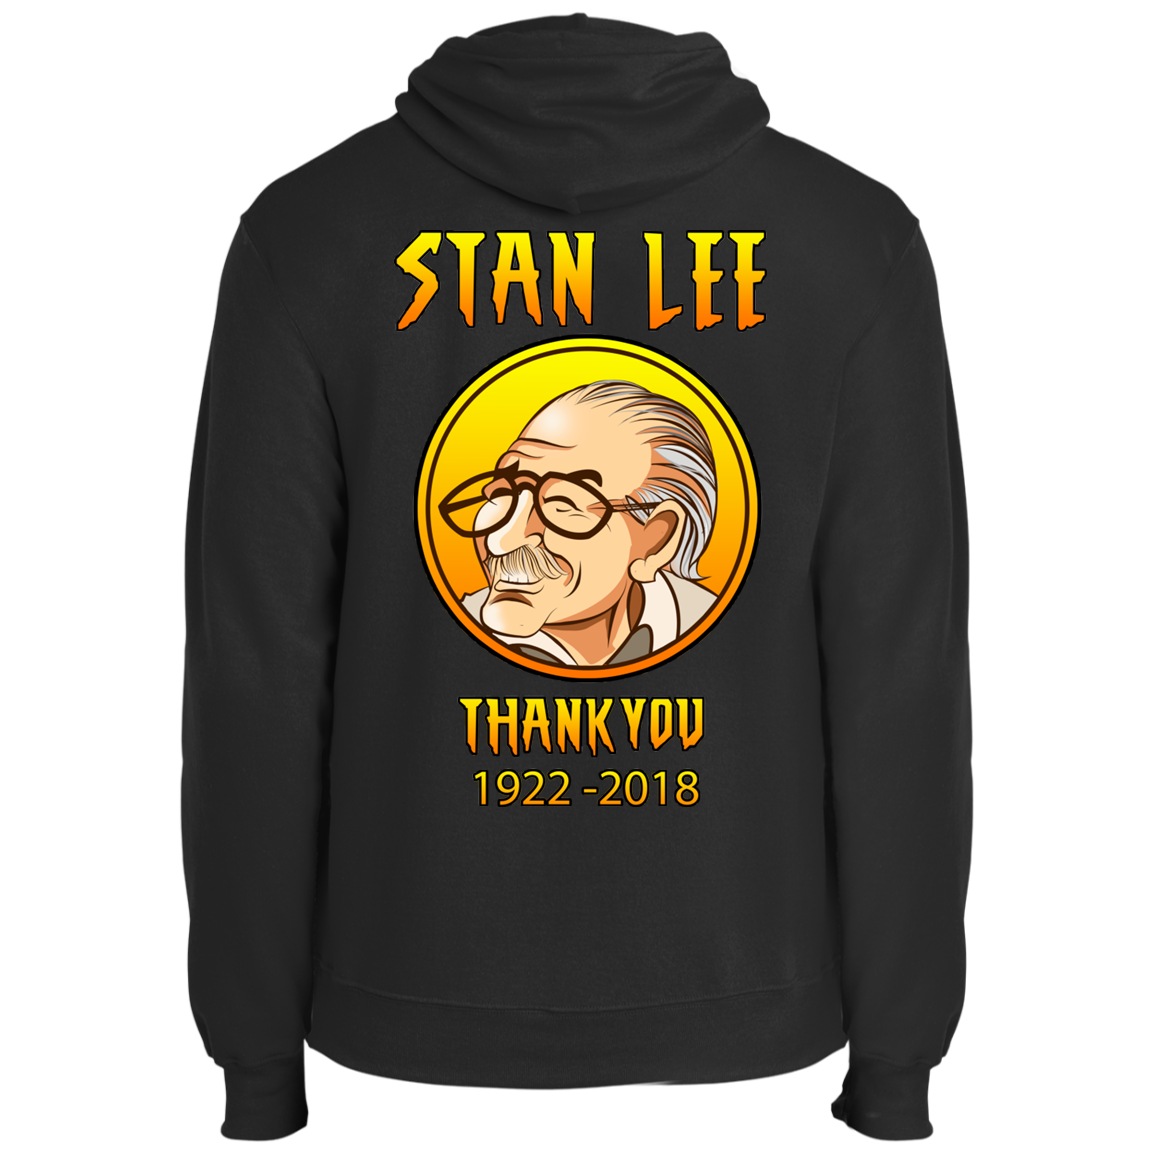 ArtichokeUSA Character and Font design. Stan Lee Thank You Fan Art. Let's Create Your Own Design Today. Fleece Pullover Hoodie